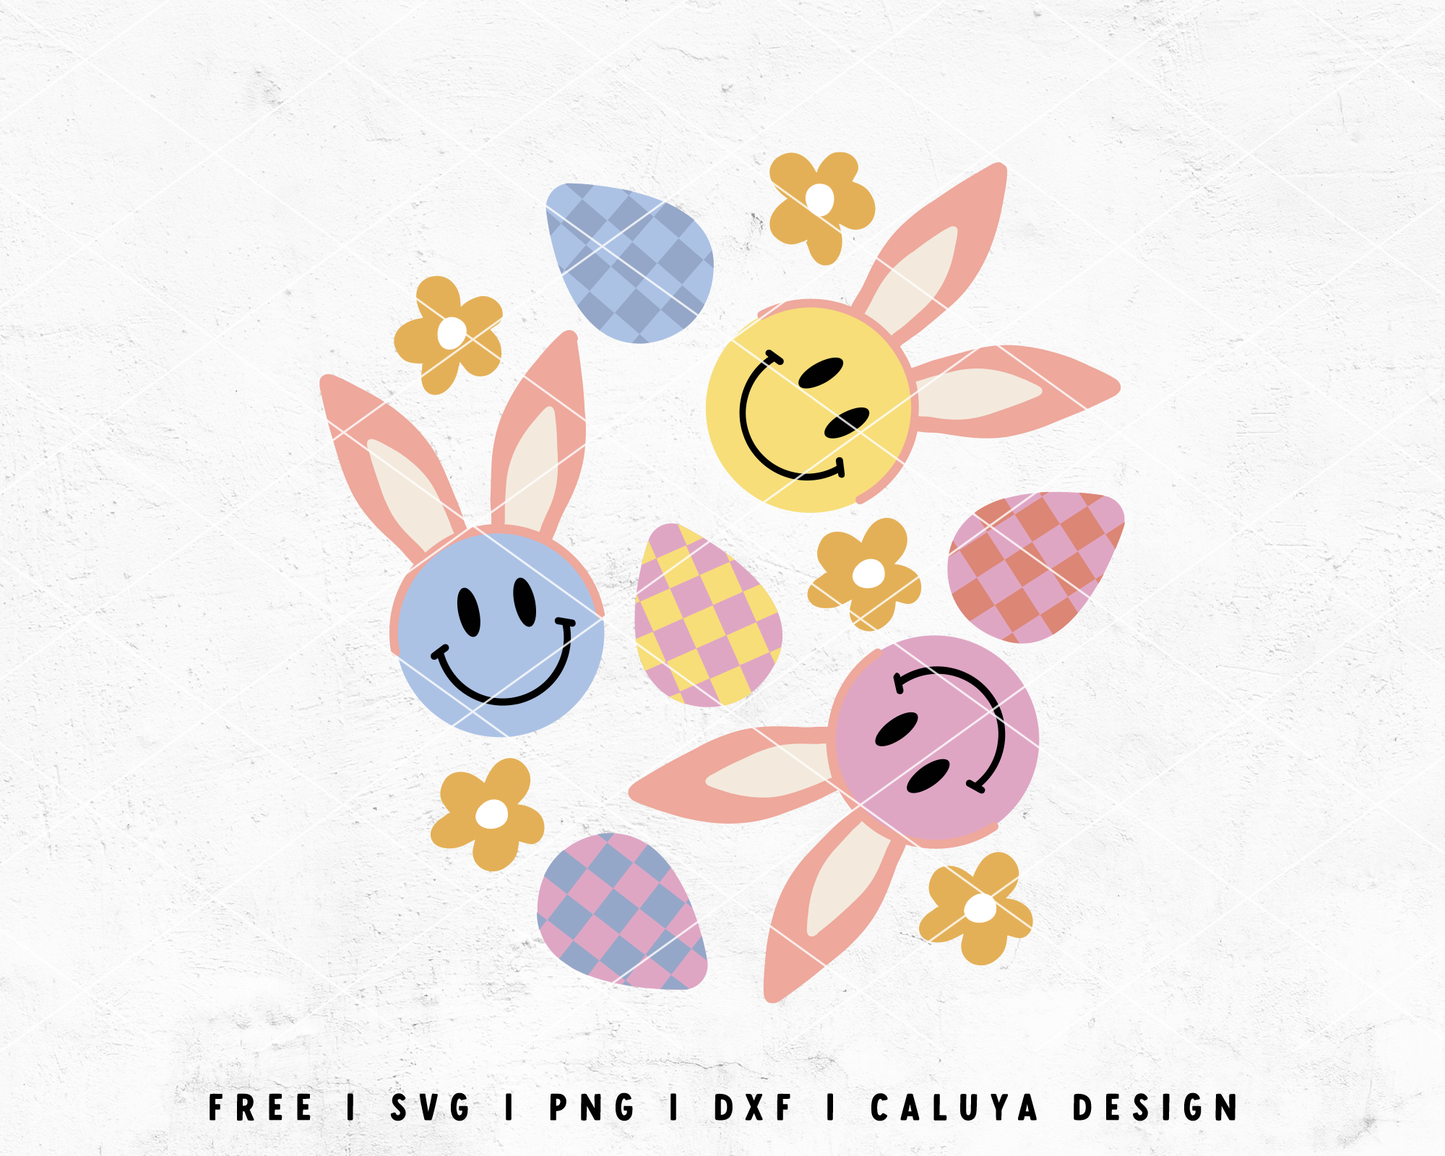 FREE Bunny Smiley Face SVG | Easter Egg SVG Cut File for Cricut, Cameo Silhouette | Free SVG Cut File